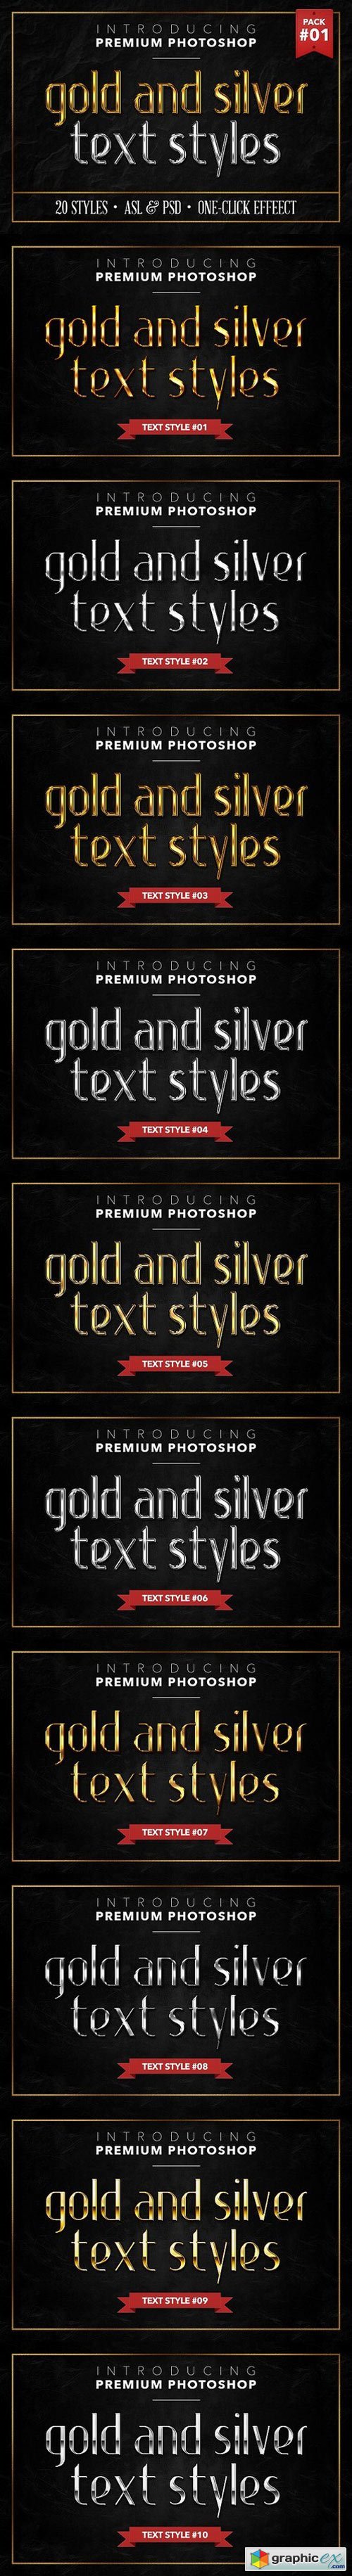 Gold & Silver #1 - 20 Styles